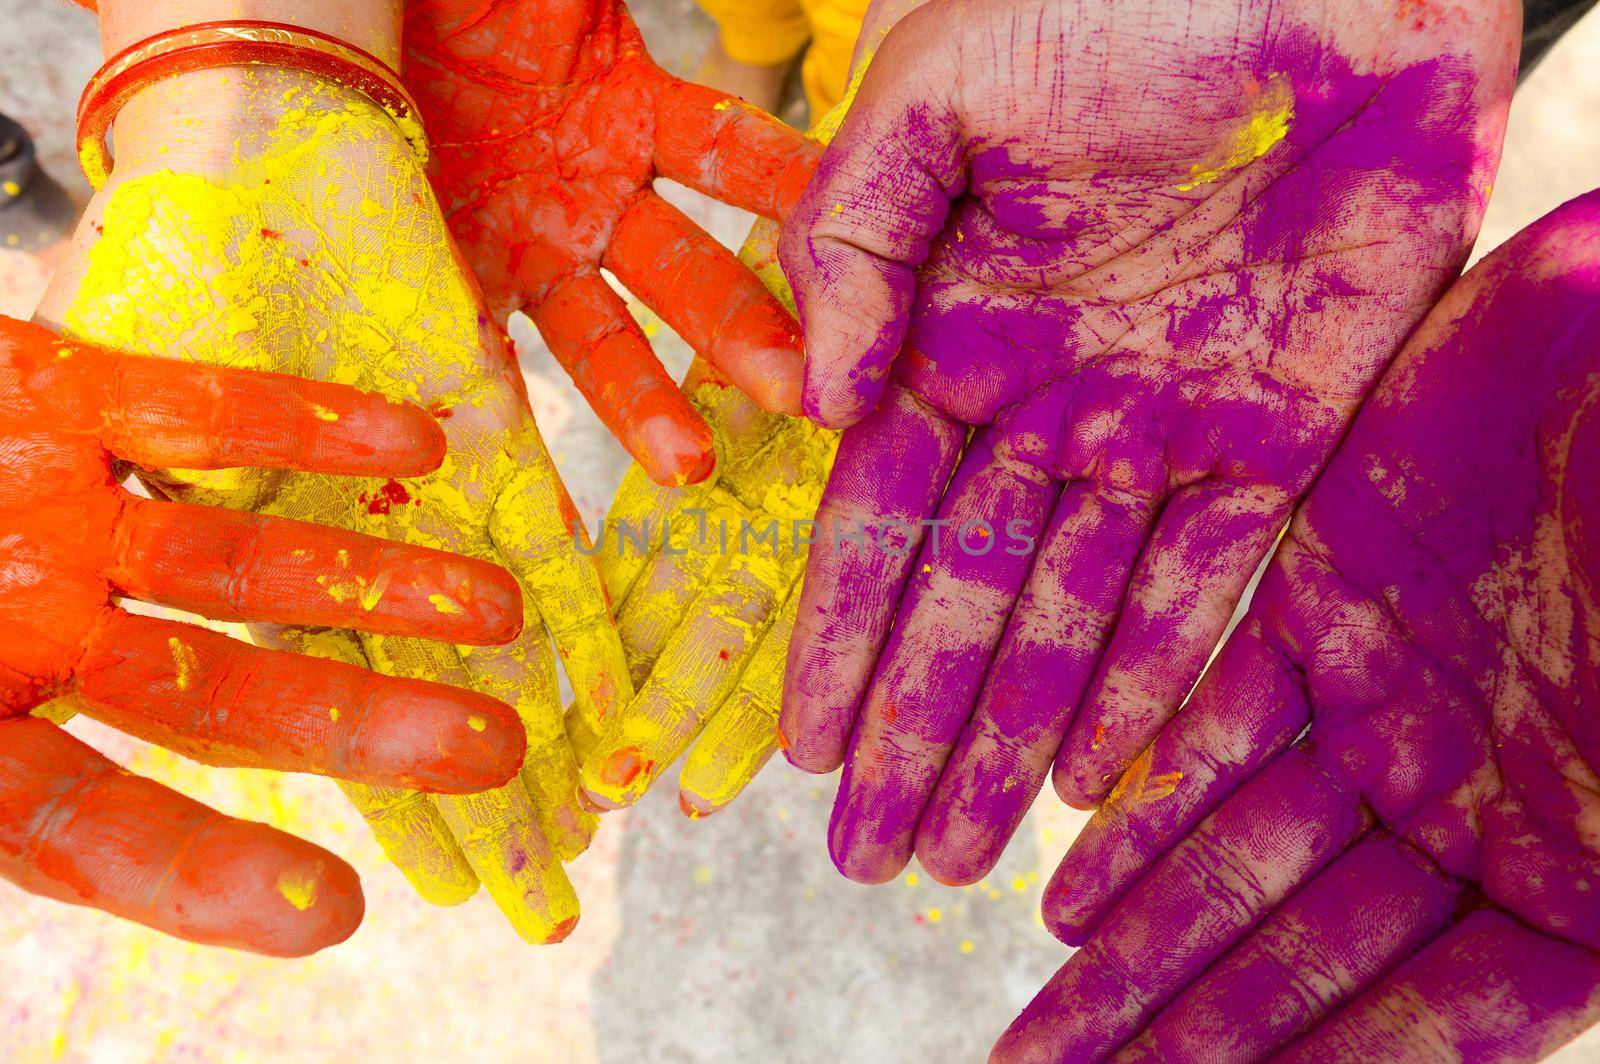 Young people with colorful powder in hands at holi festival in India celebrated with different colors. Holi hands, colorful hands illustration. Close up view. by sudiptabhowmick